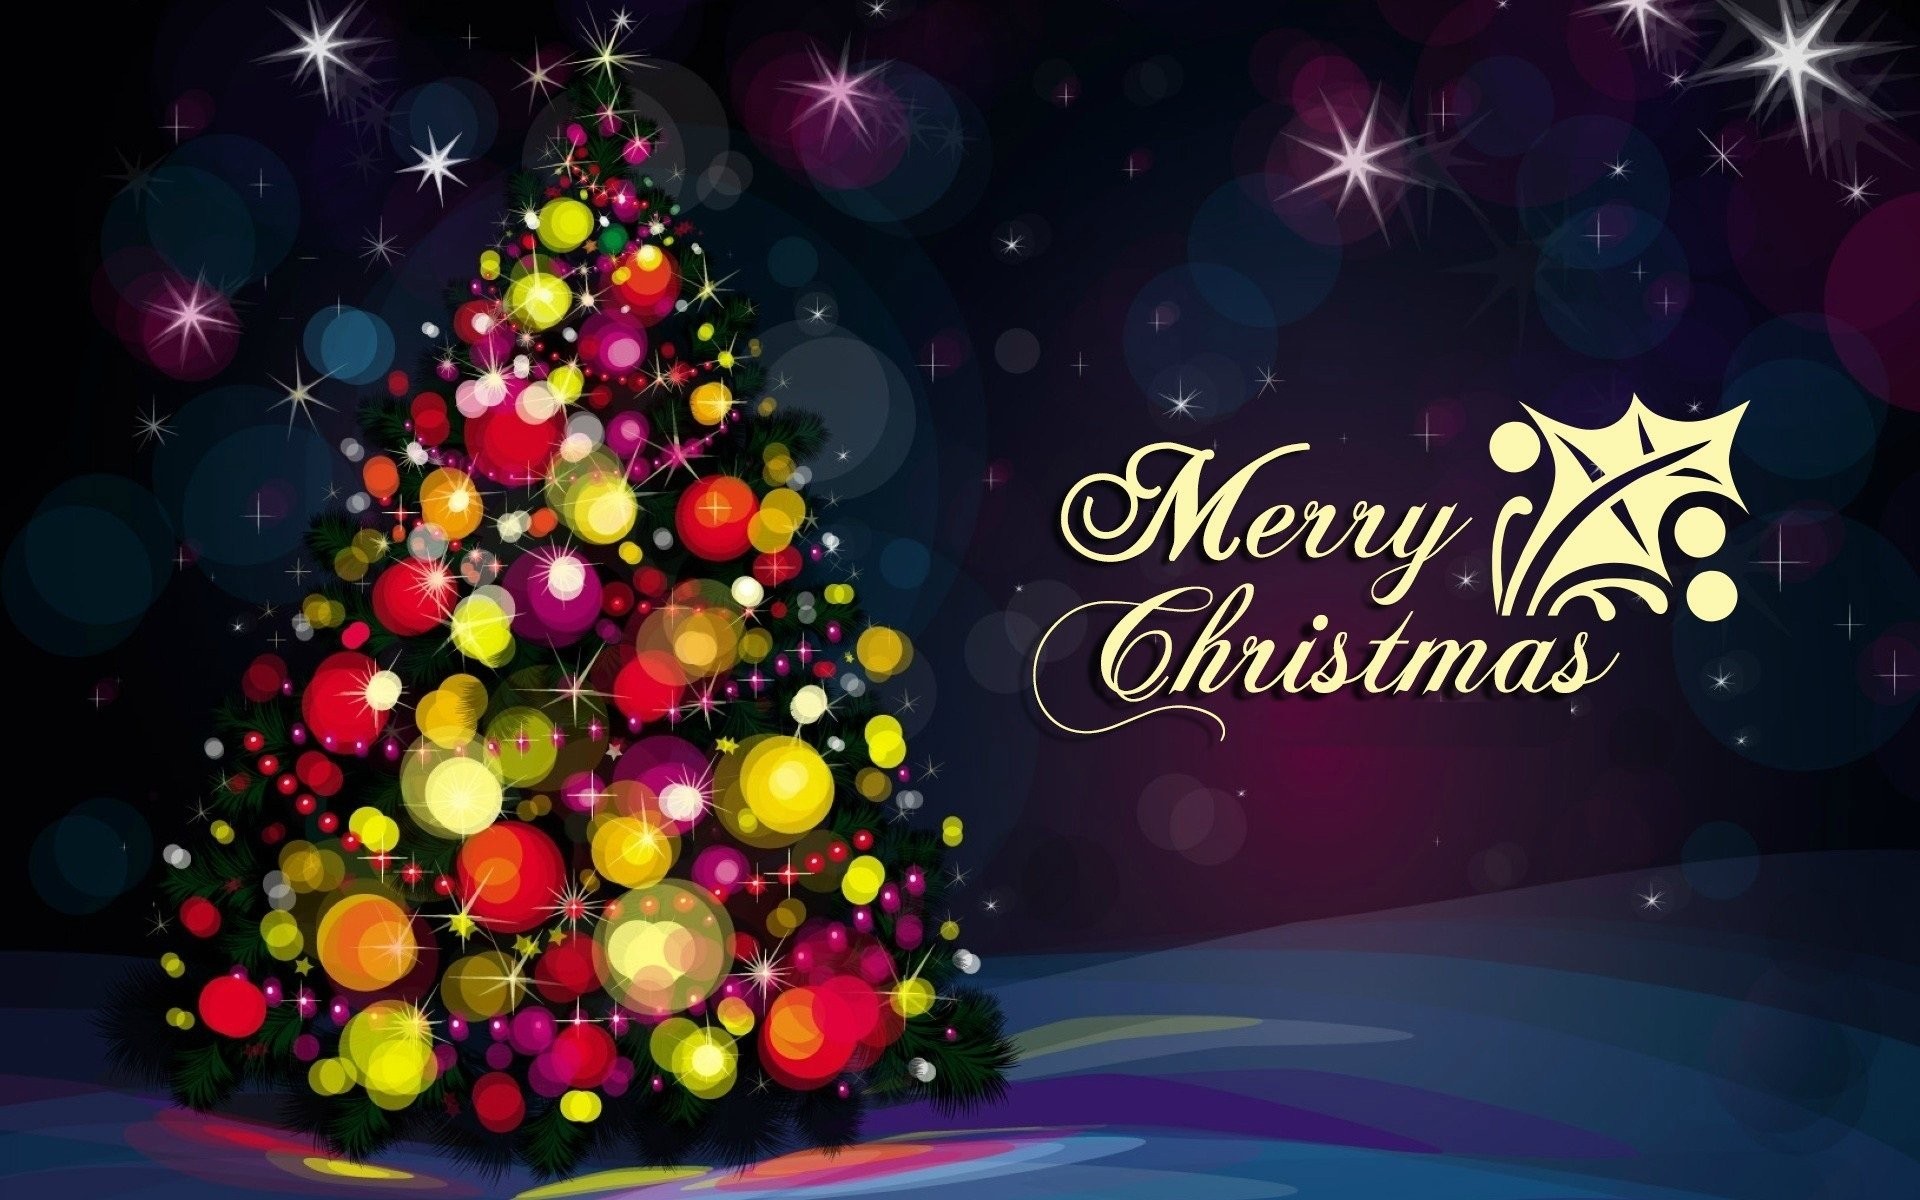 1920x1200 Merry Christmas Images for facebook